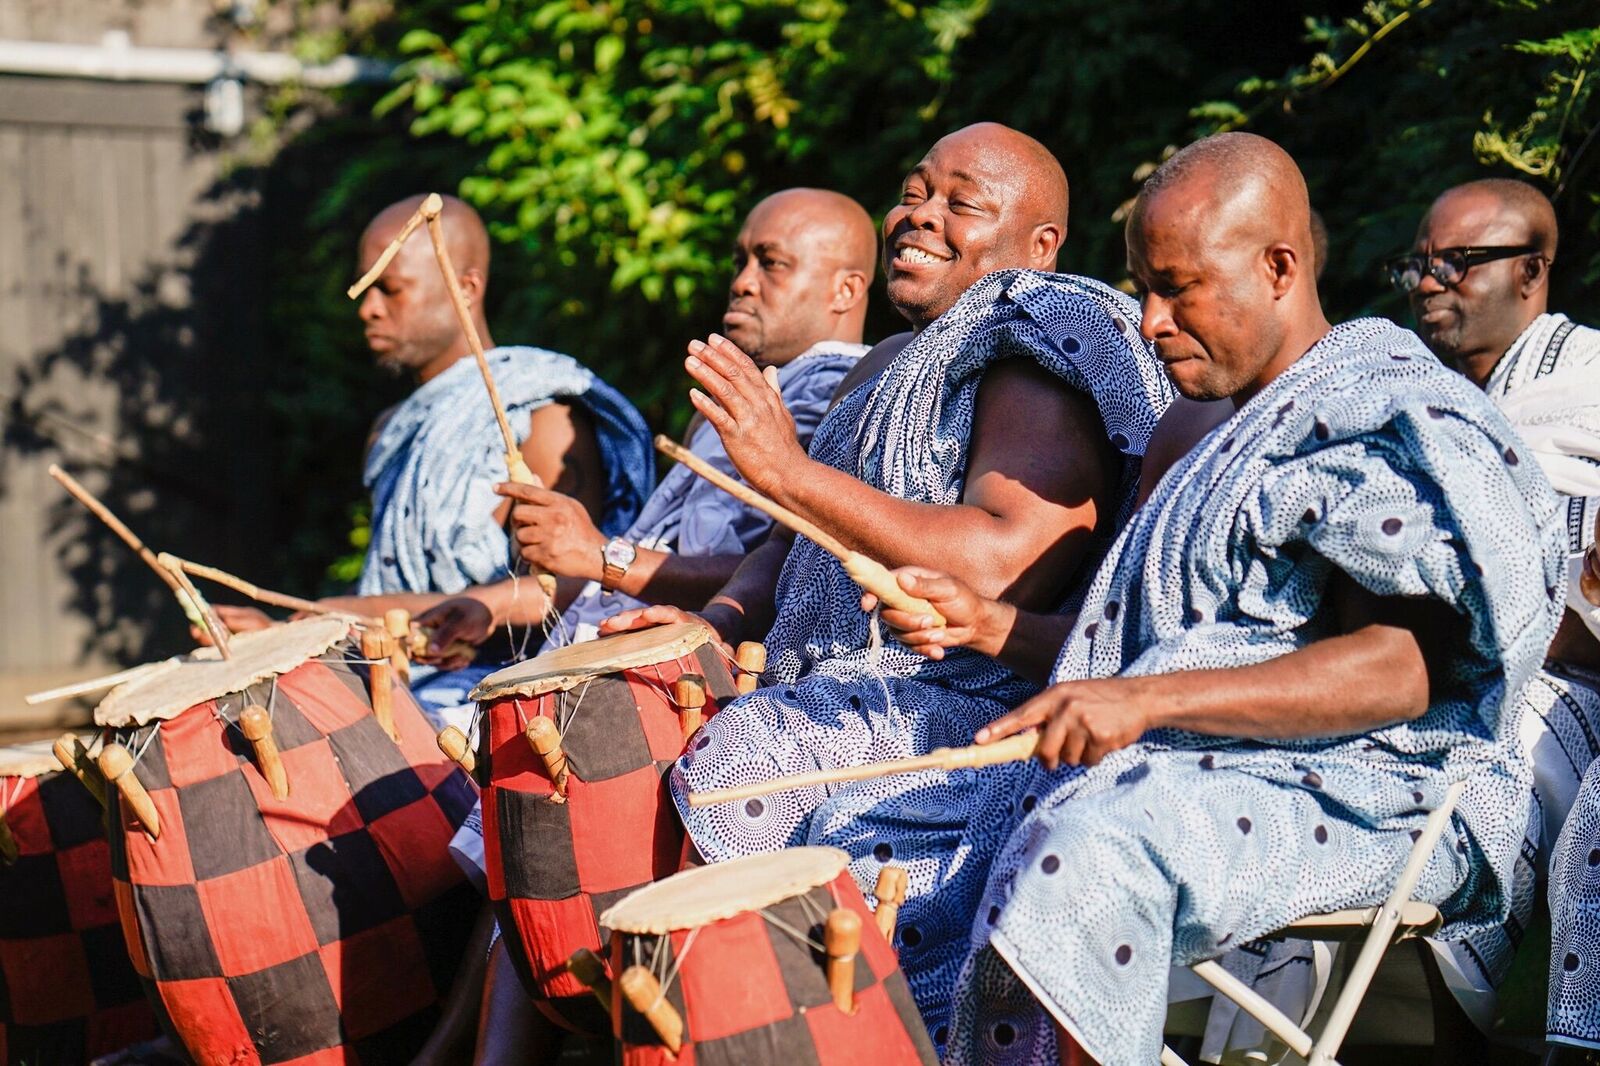 Music for this Ghanaian ceremony honored the heritage of the groom. Check out all of the details from this garden wedding we planned at Grounds for Sculpture!